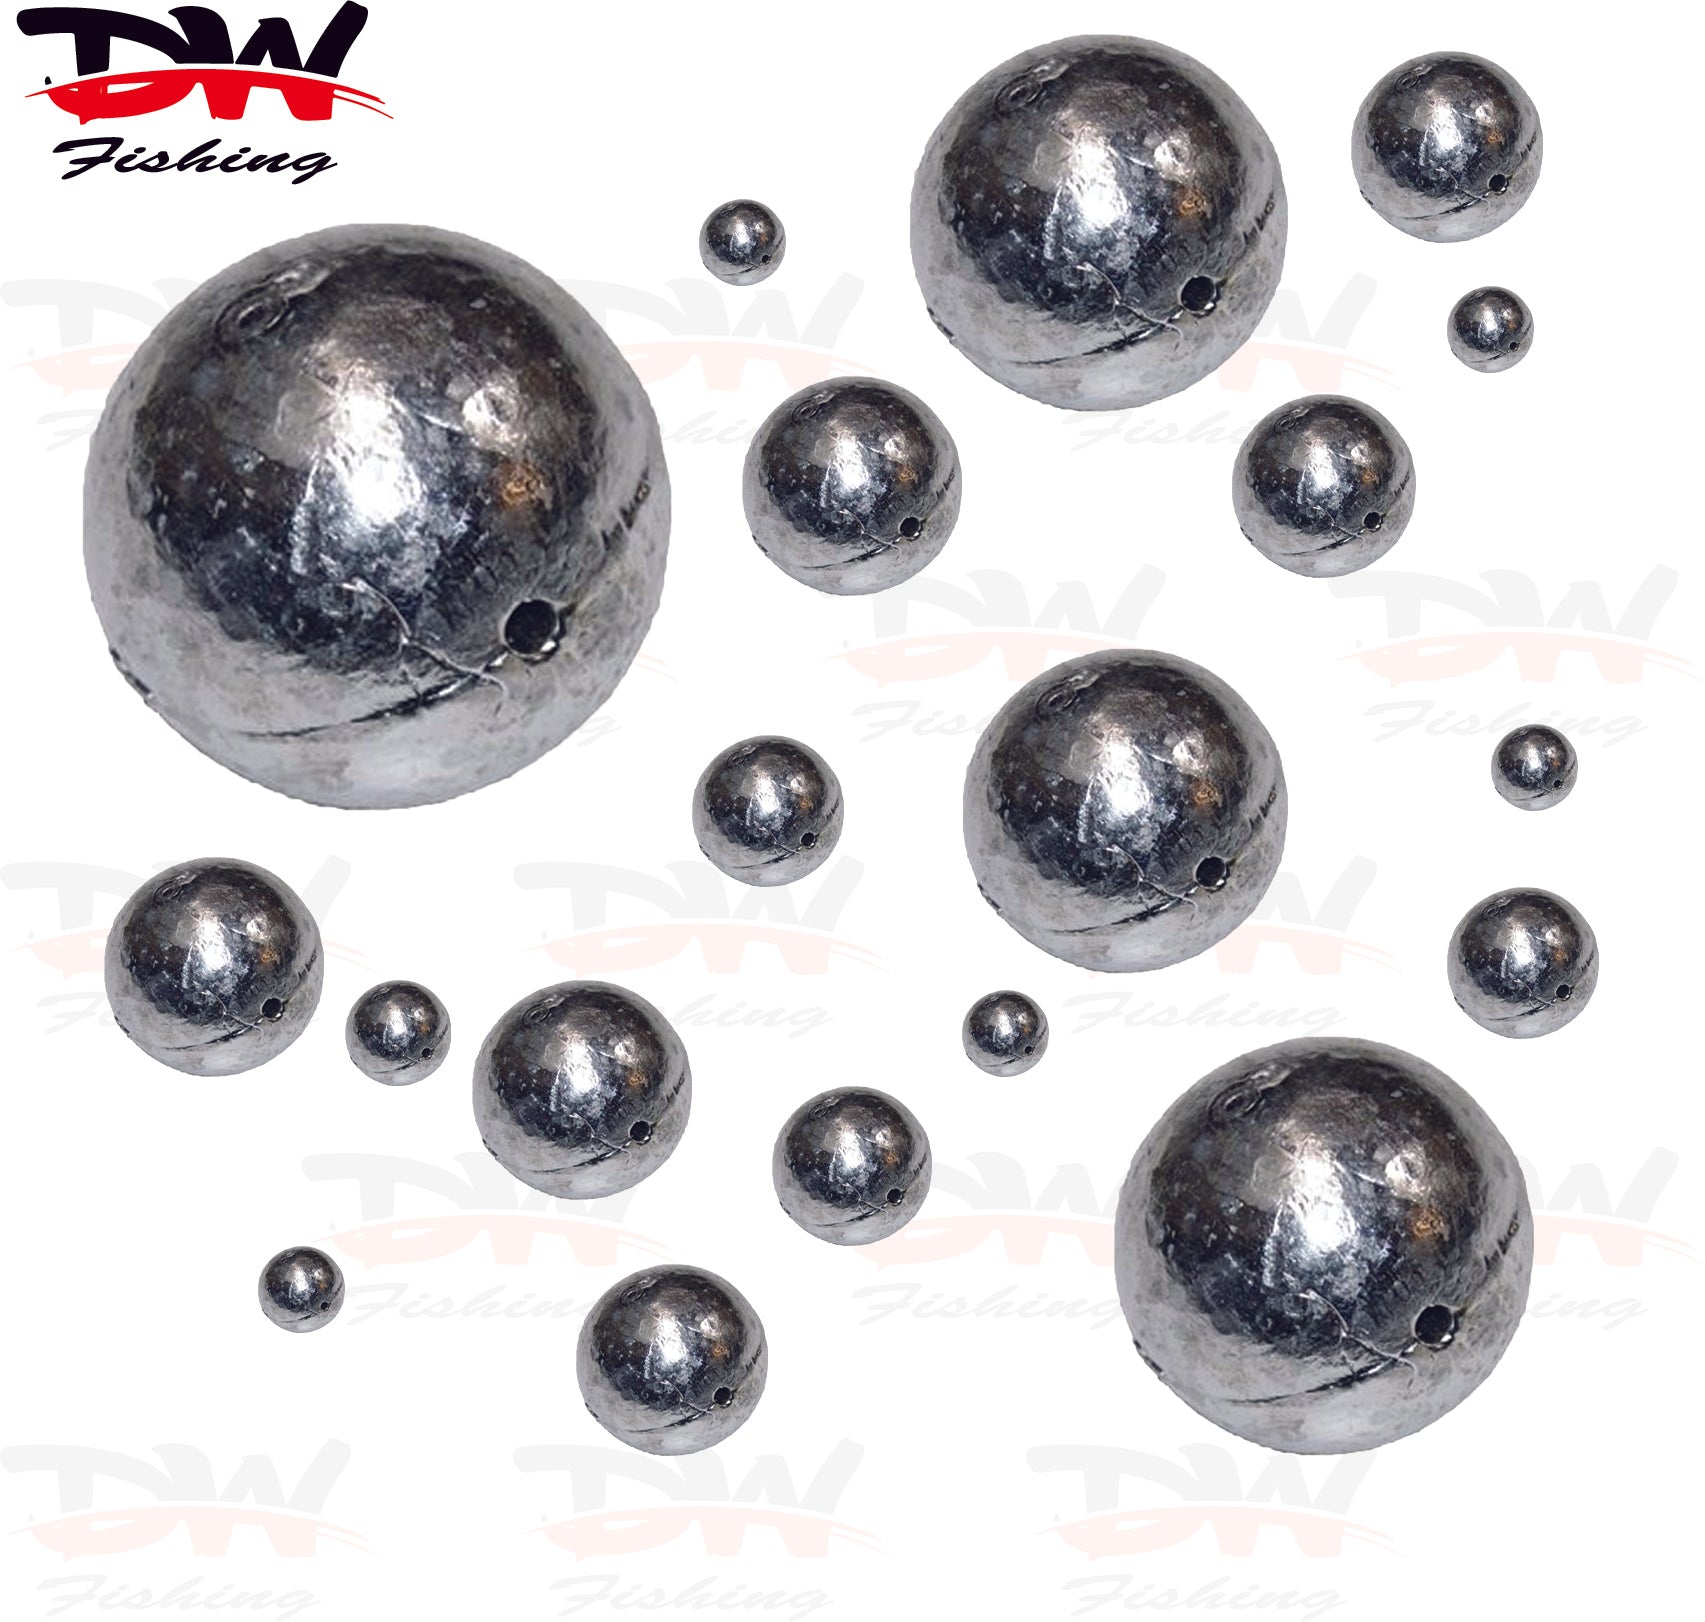 Ball Sinkers For Sale, Fishing Tackle Online